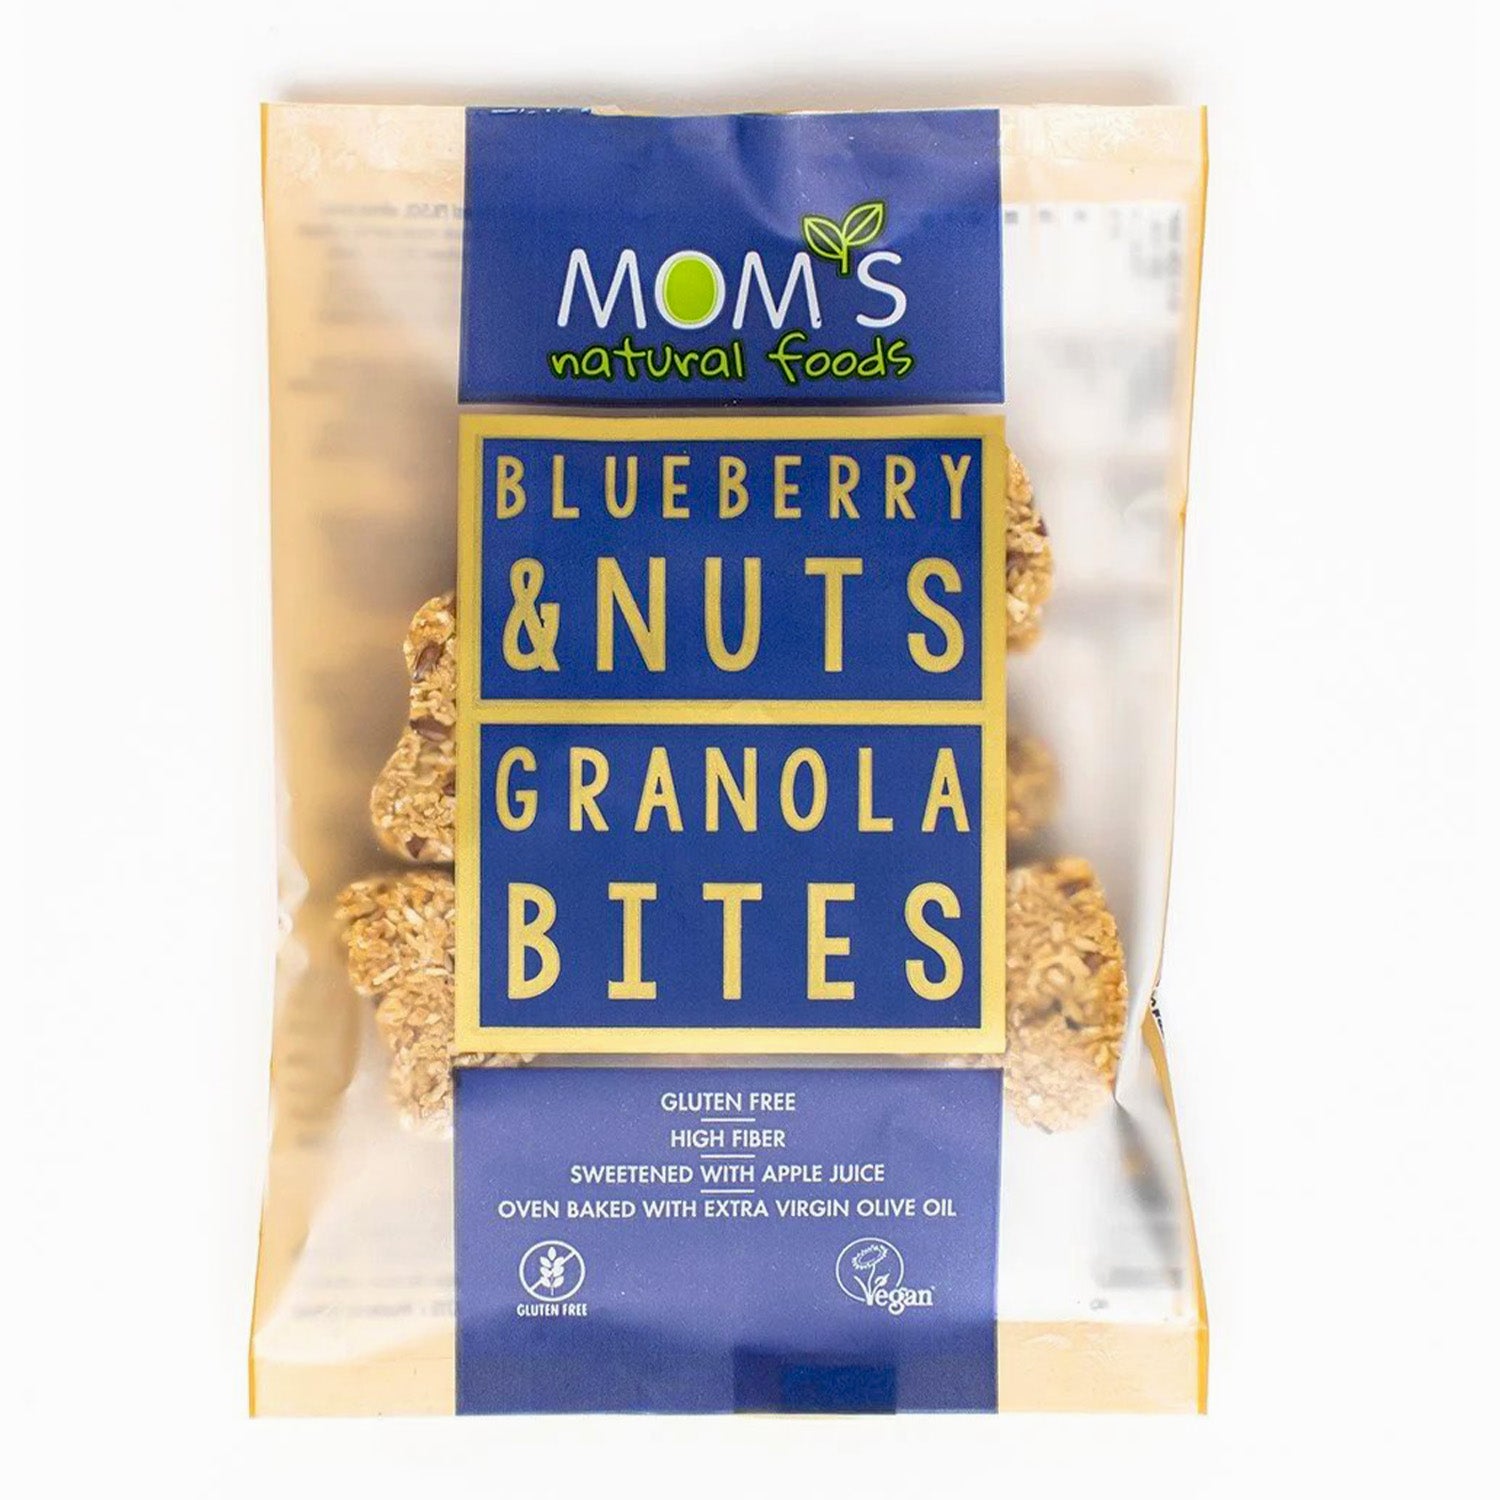 MOM'S NATURAL FOODS BlueBerry & Nuts Granola Bites 50g